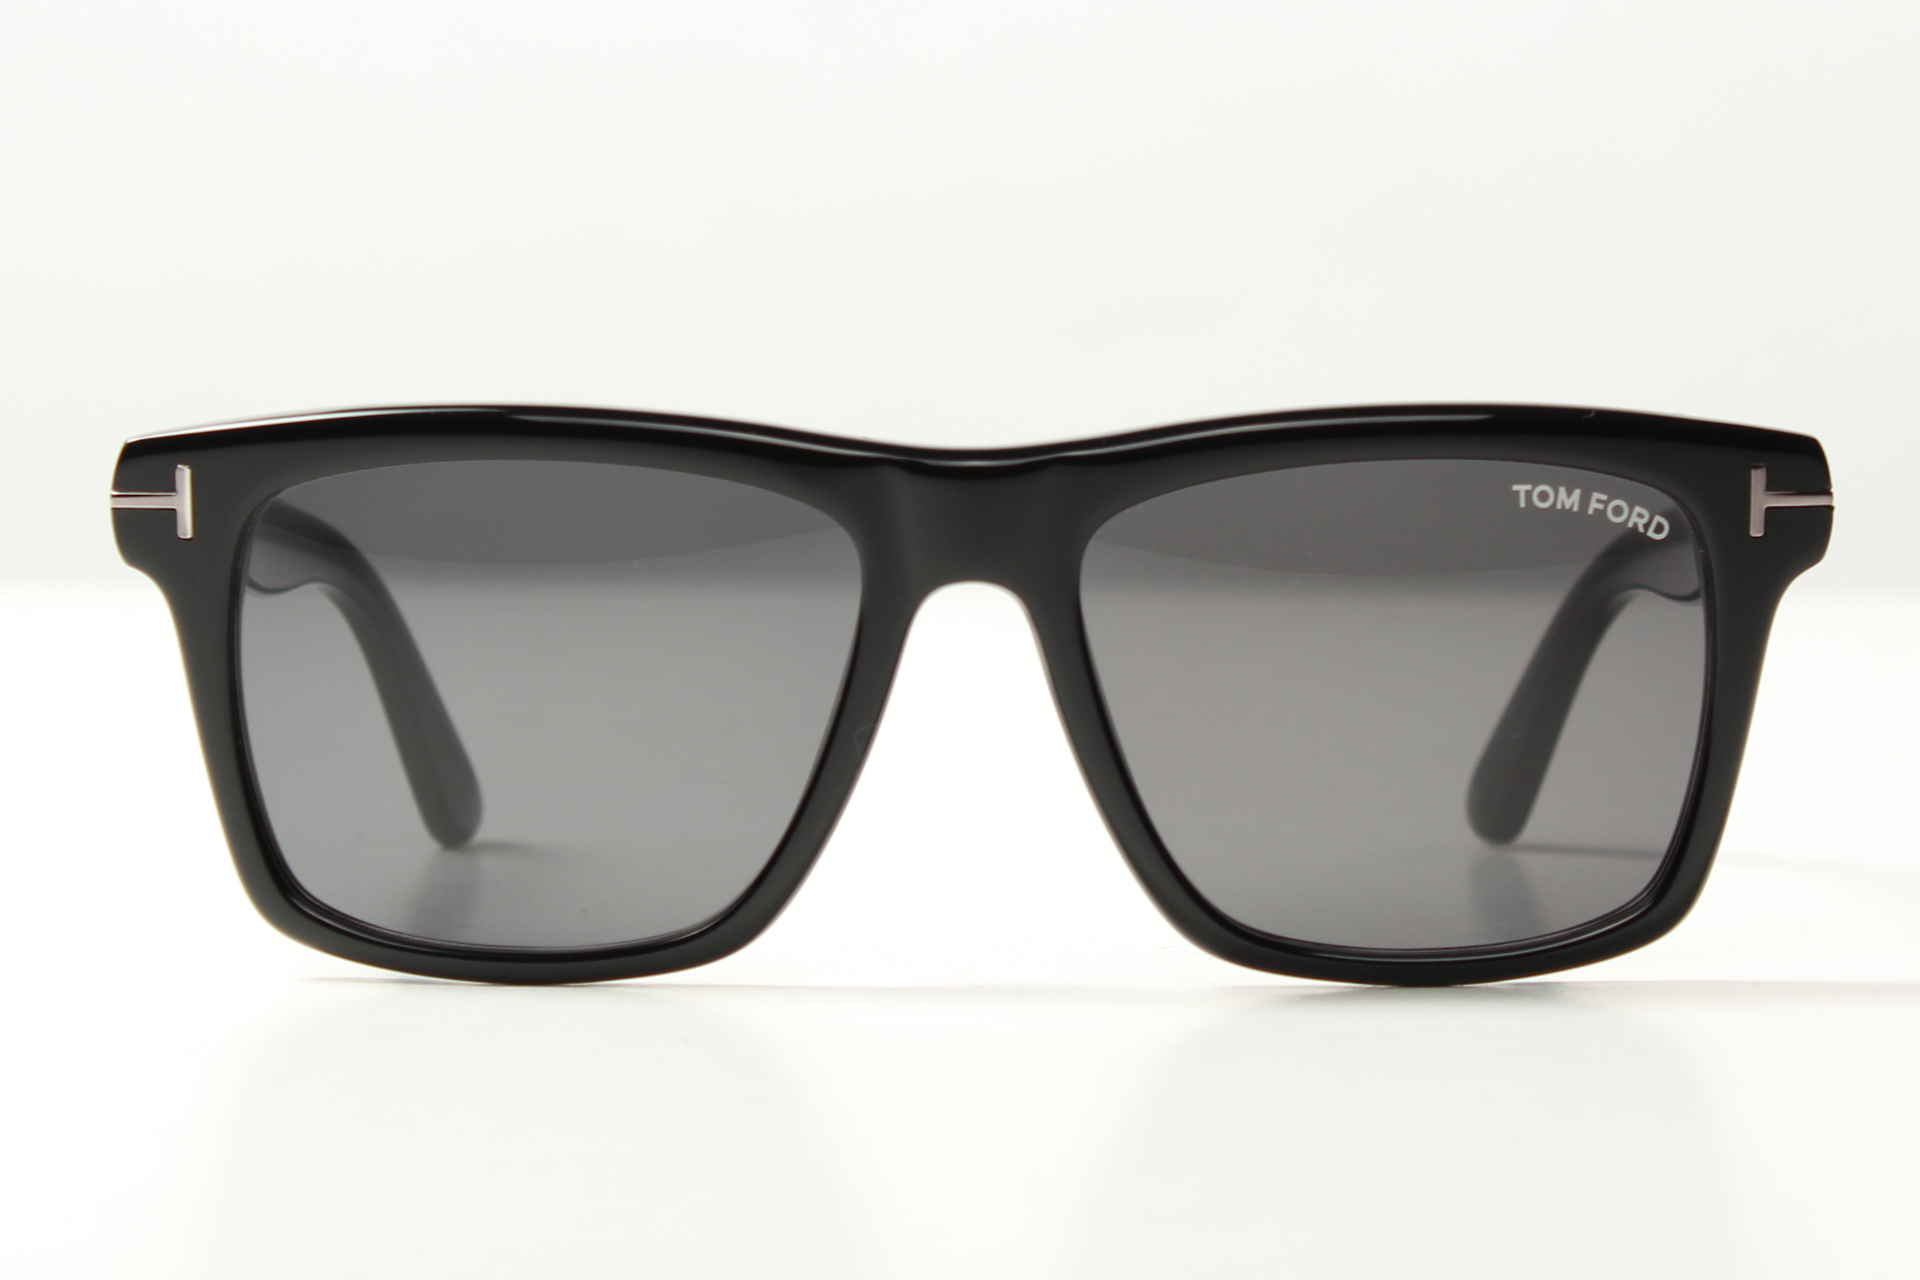 Tom Ford TF906 01A